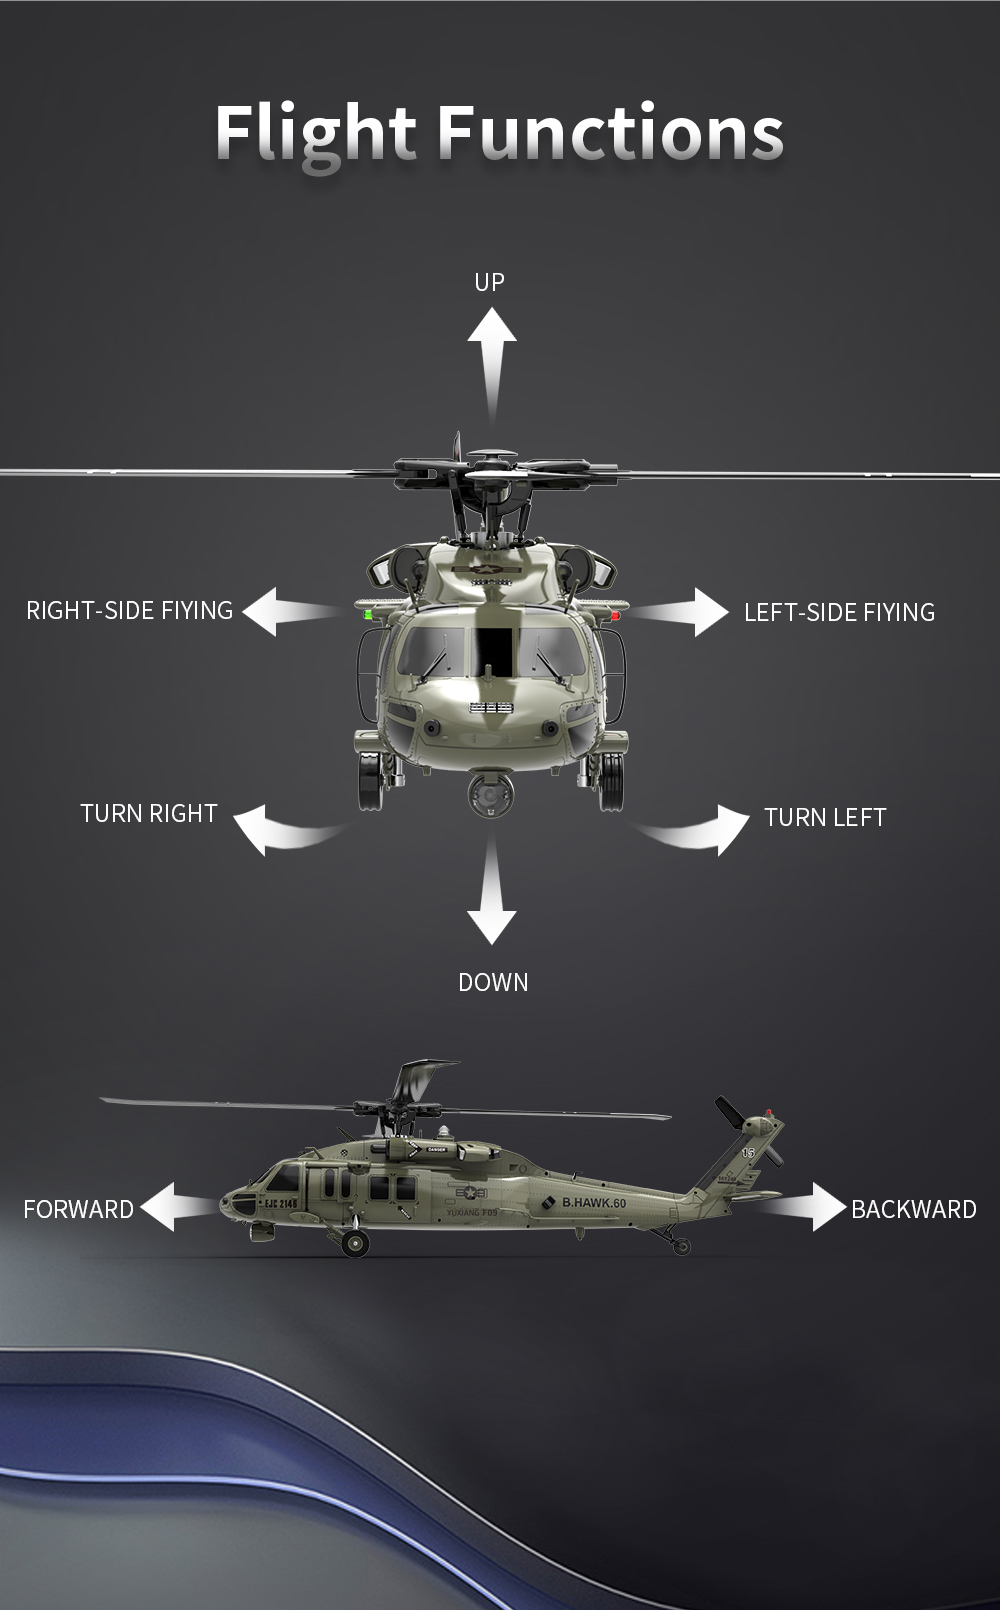 UH-60 Black Hawk RC Military Helicopter (AH-1Z Viper, Attack helicopter, H145M Light twin engine)